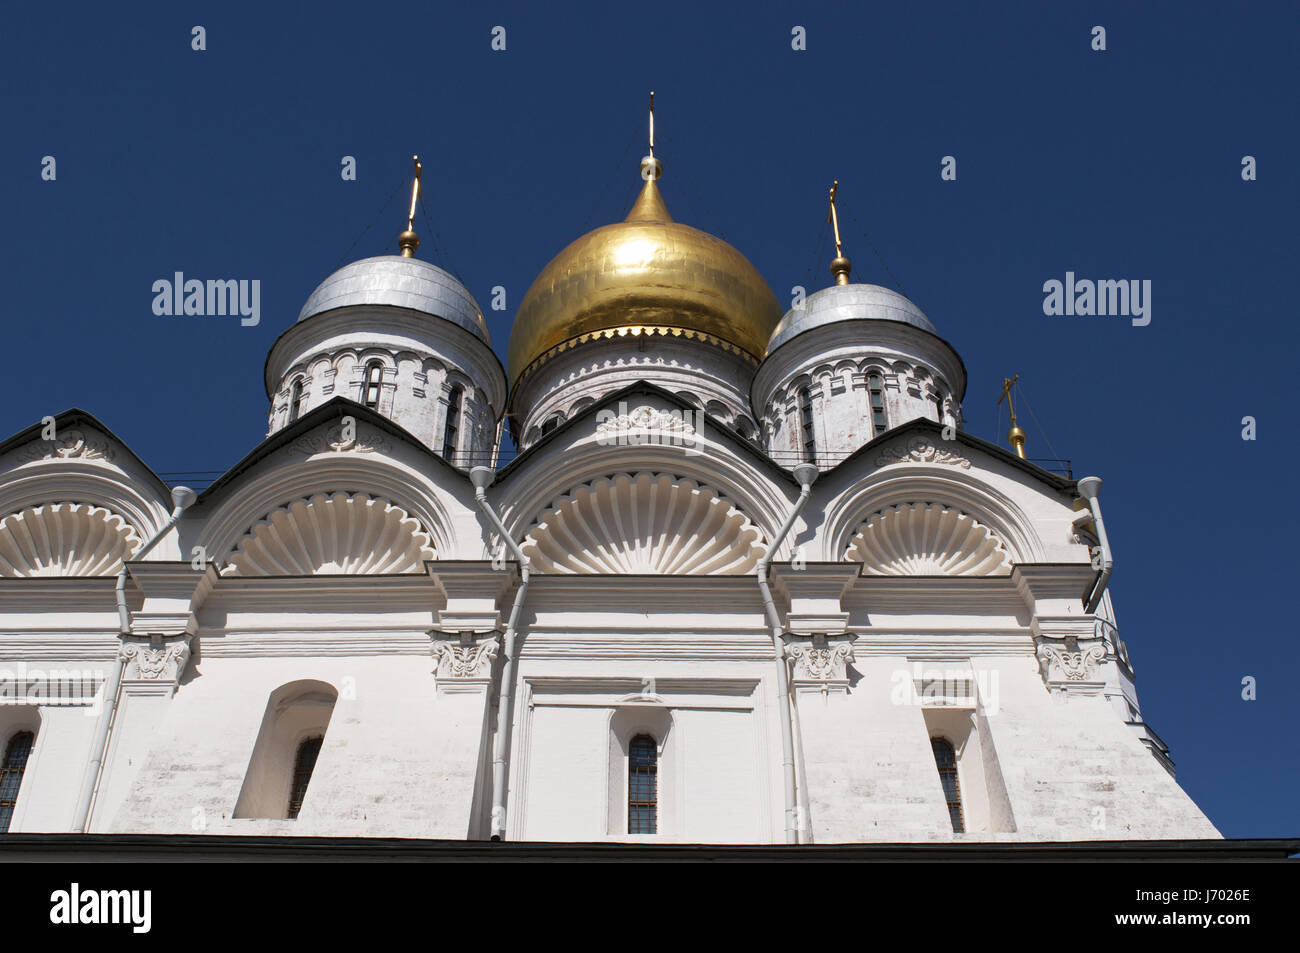 Russia: the Cathedral of the Archangel, a Russian Orthodox church dedicated to the Archangel Michael in the Cathedral Square of the Moscow Kremlin Stock Photo